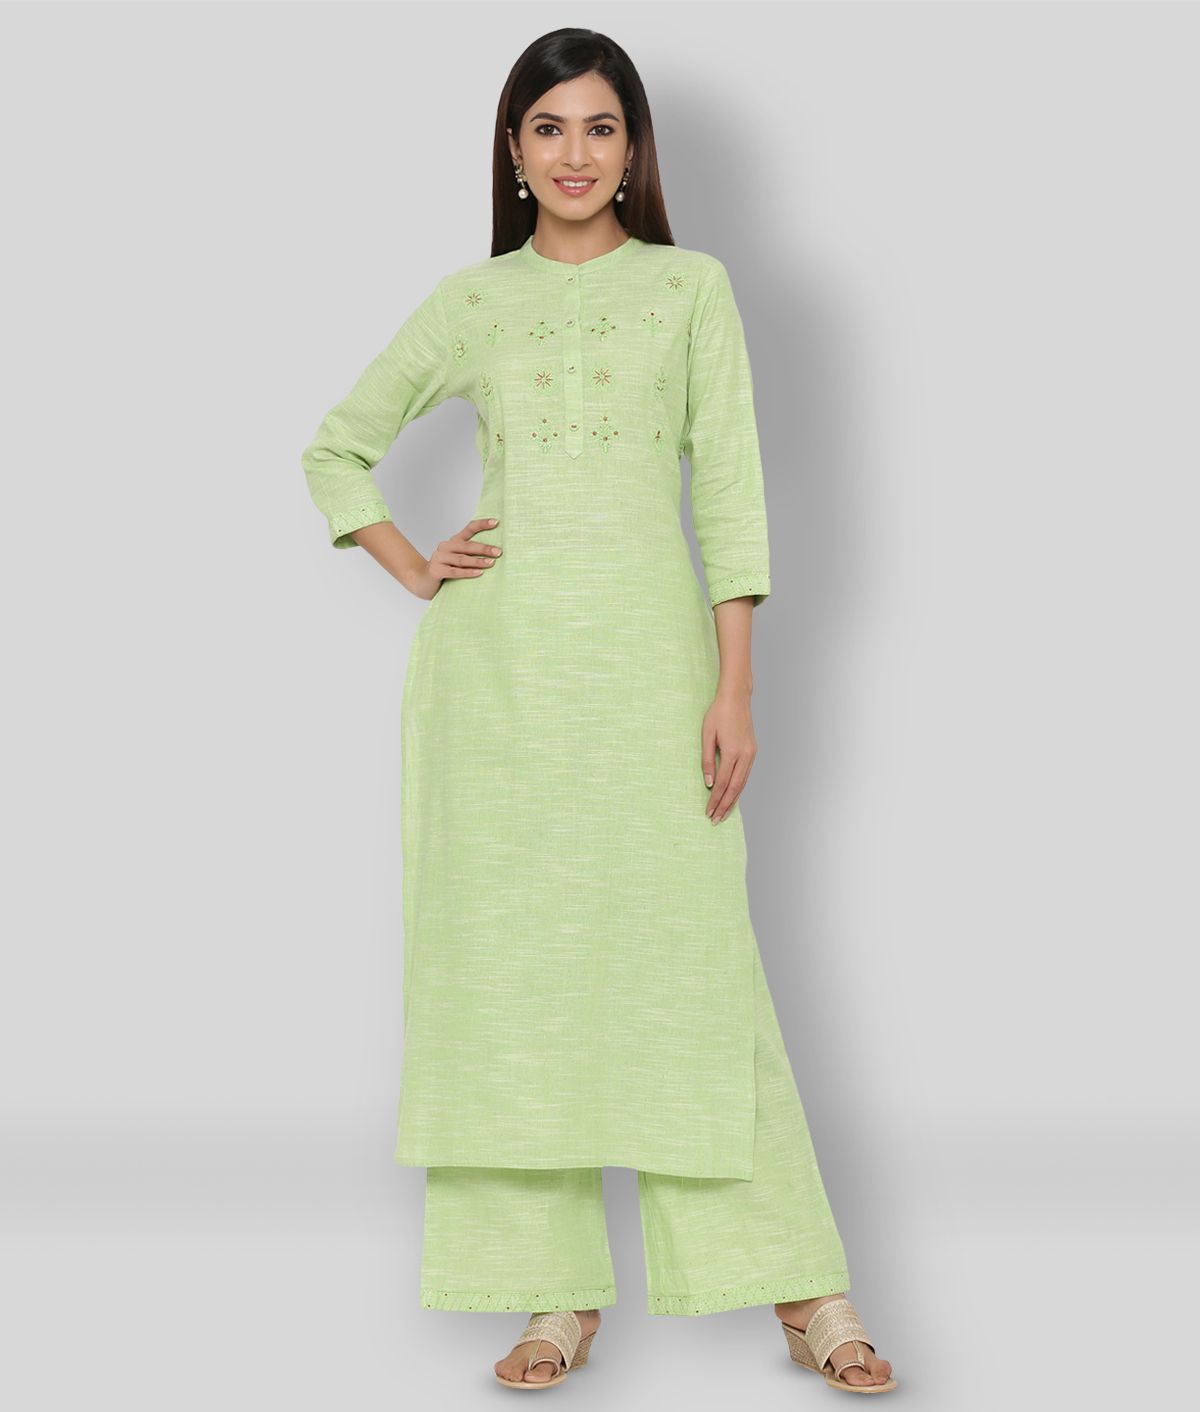     			KIPEK - Mint Green Straight Cotton Women's Stitched Salwar Suit ( Pack of 1 )